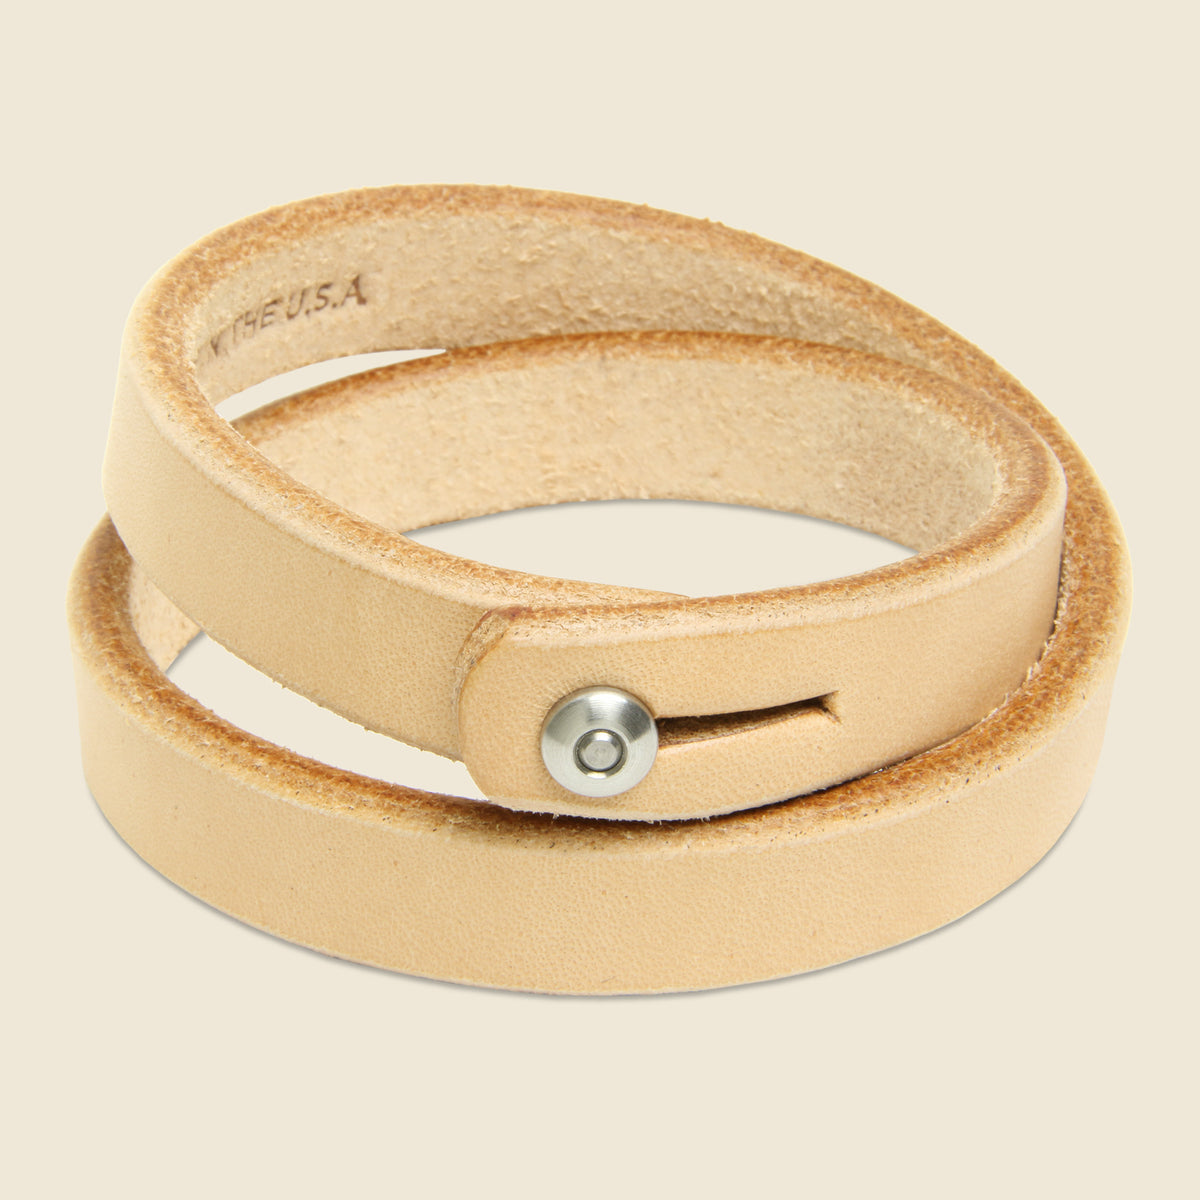 Double Wrap Wristband - Natural/Stainless